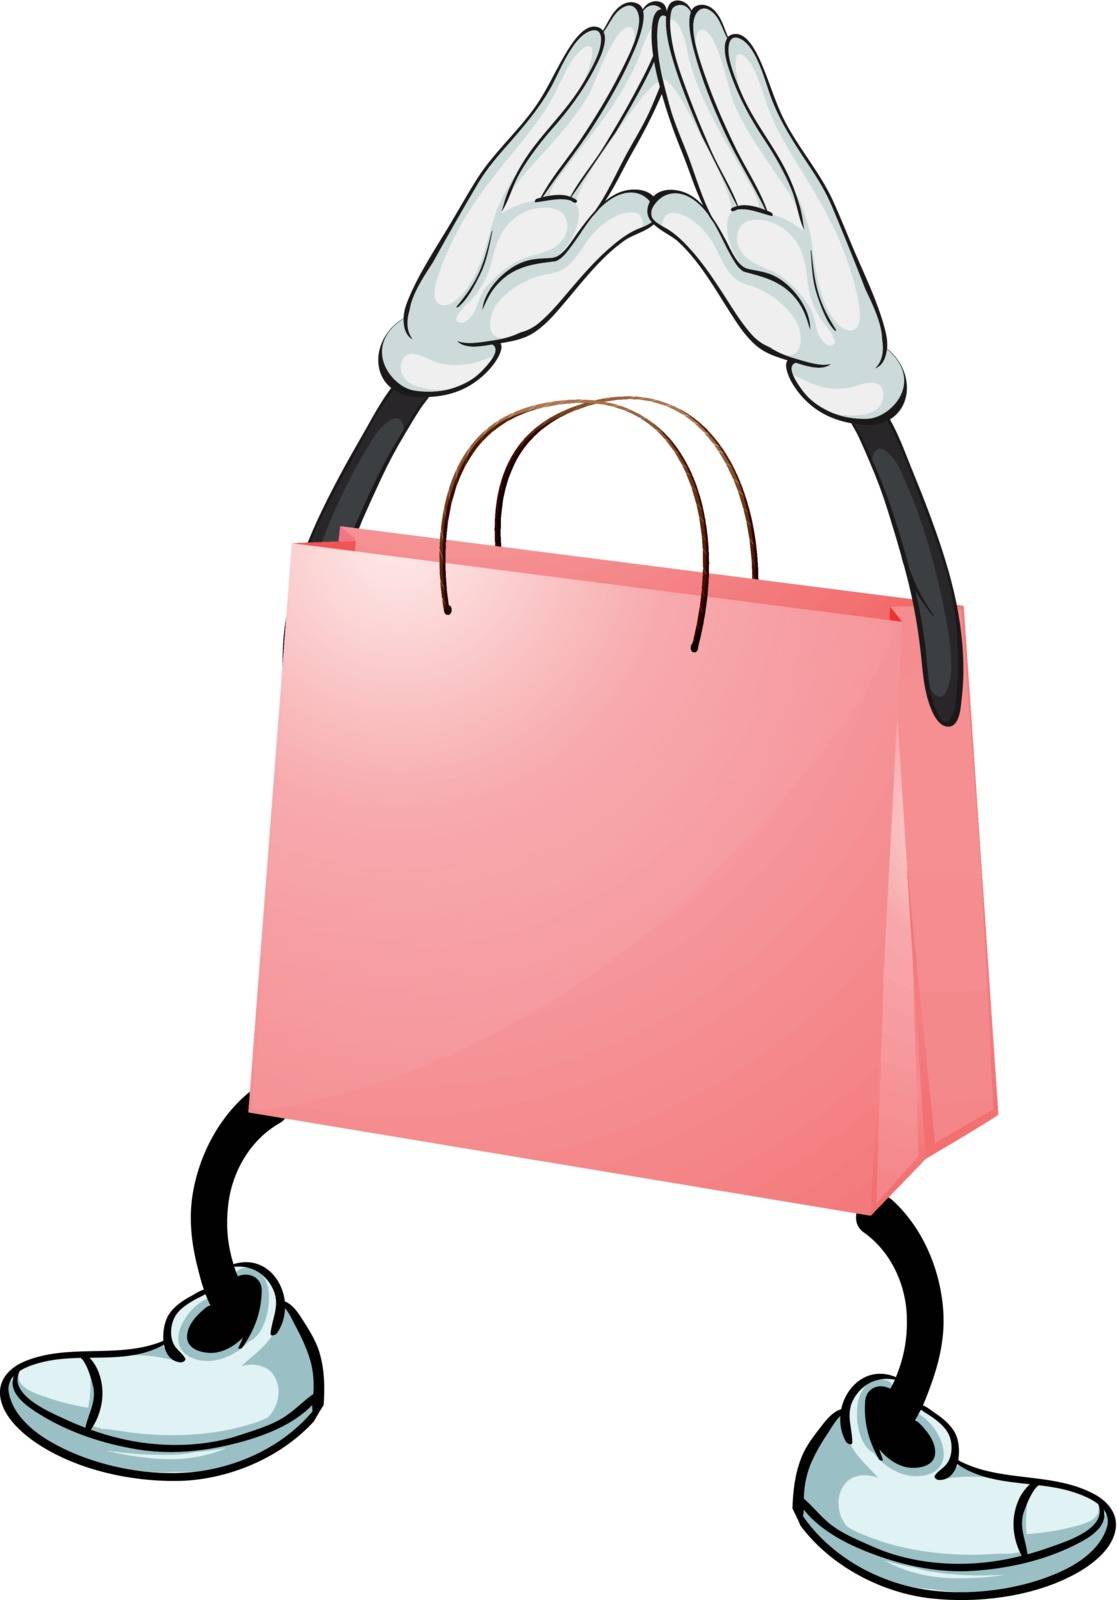 Illustration of a pink bag on a white background